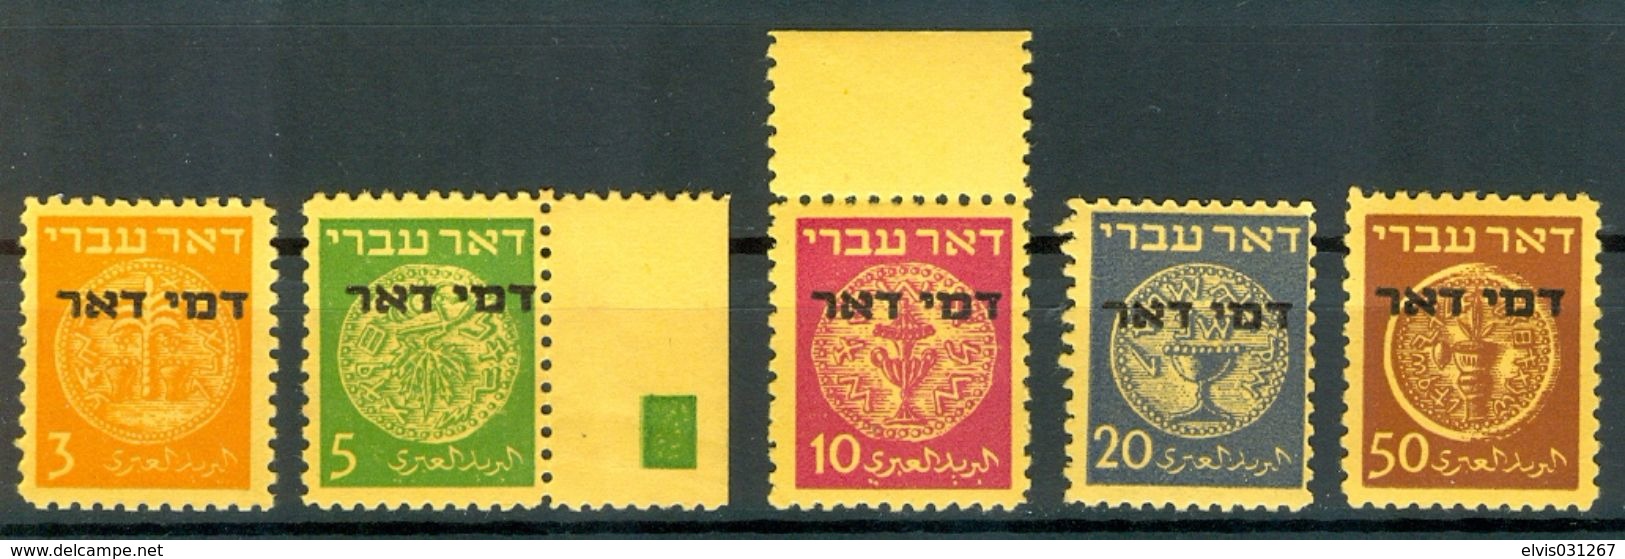 Israel - 1948, Michel/Philex No. : 1-5, Perf: 11/11 - Portomarken - MNH - *** - No Tab - Unused Stamps (without Tabs)